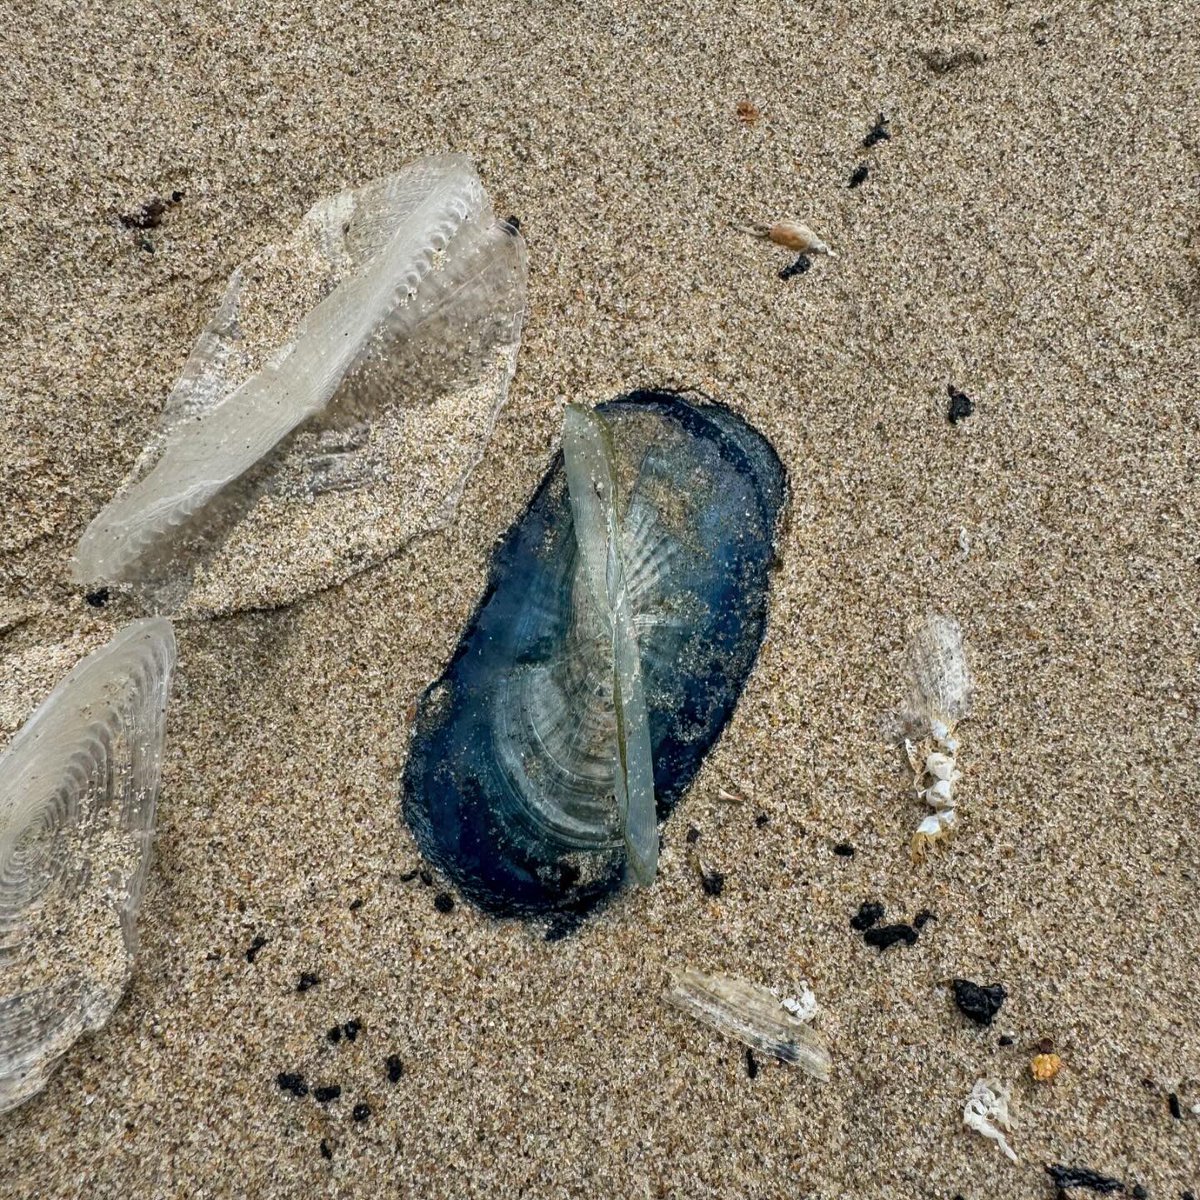 Hundreds of Velella, AKA “By-the-Wind-Sailors,” have washed ashore on Kiddie Beach. Learn more about these sea creatures here: nps.gov/pore/learn/nat…